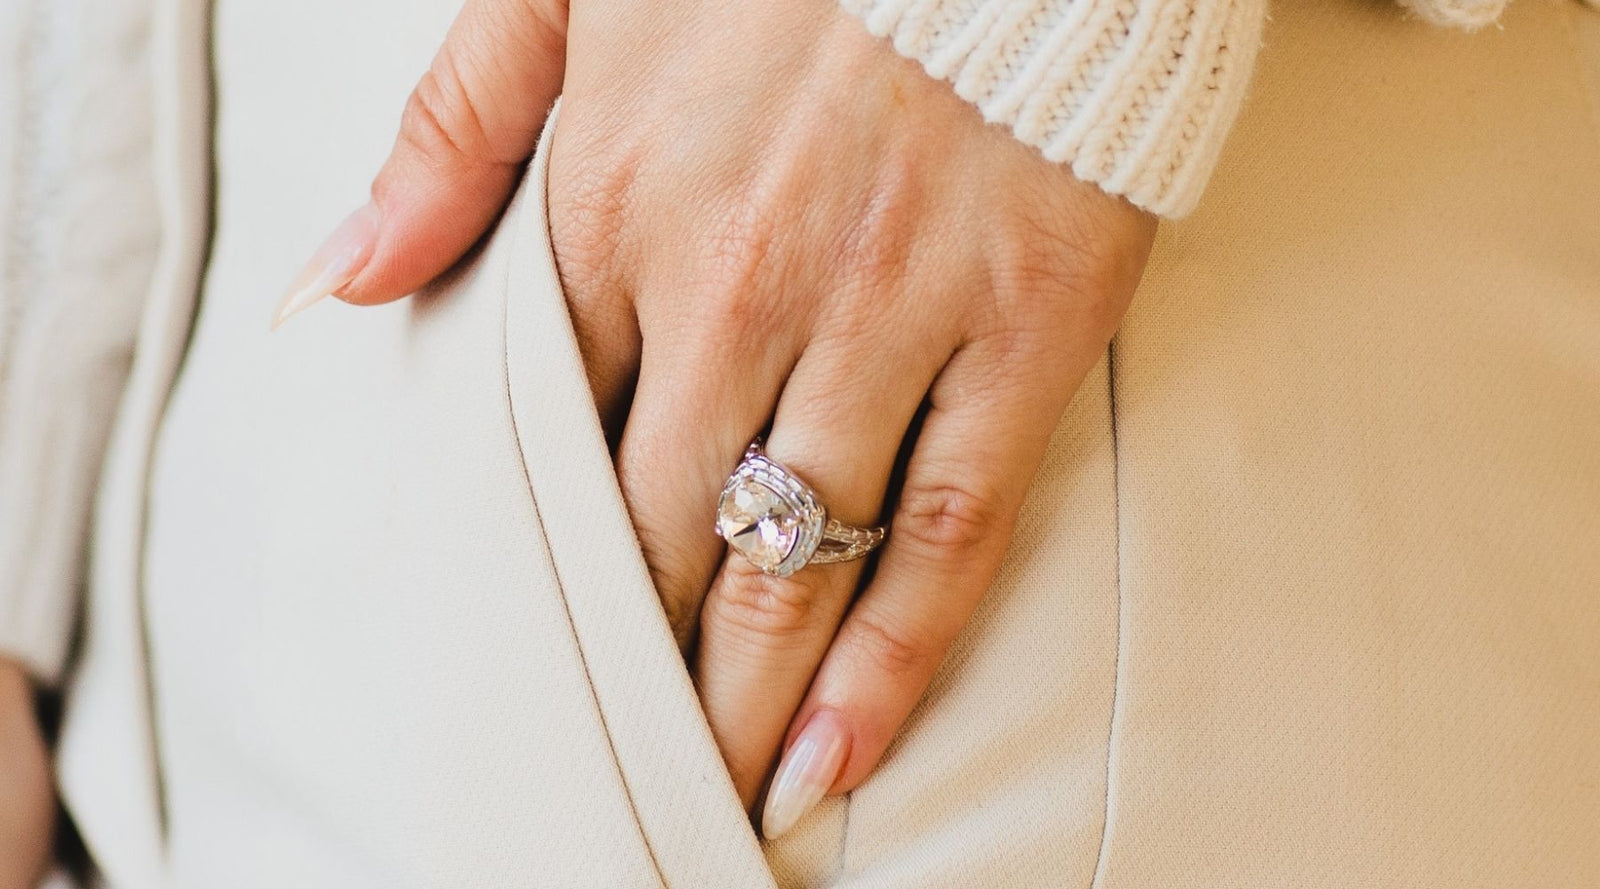 What Is a Statement Ring? Fashion Trend, or Something Deeper